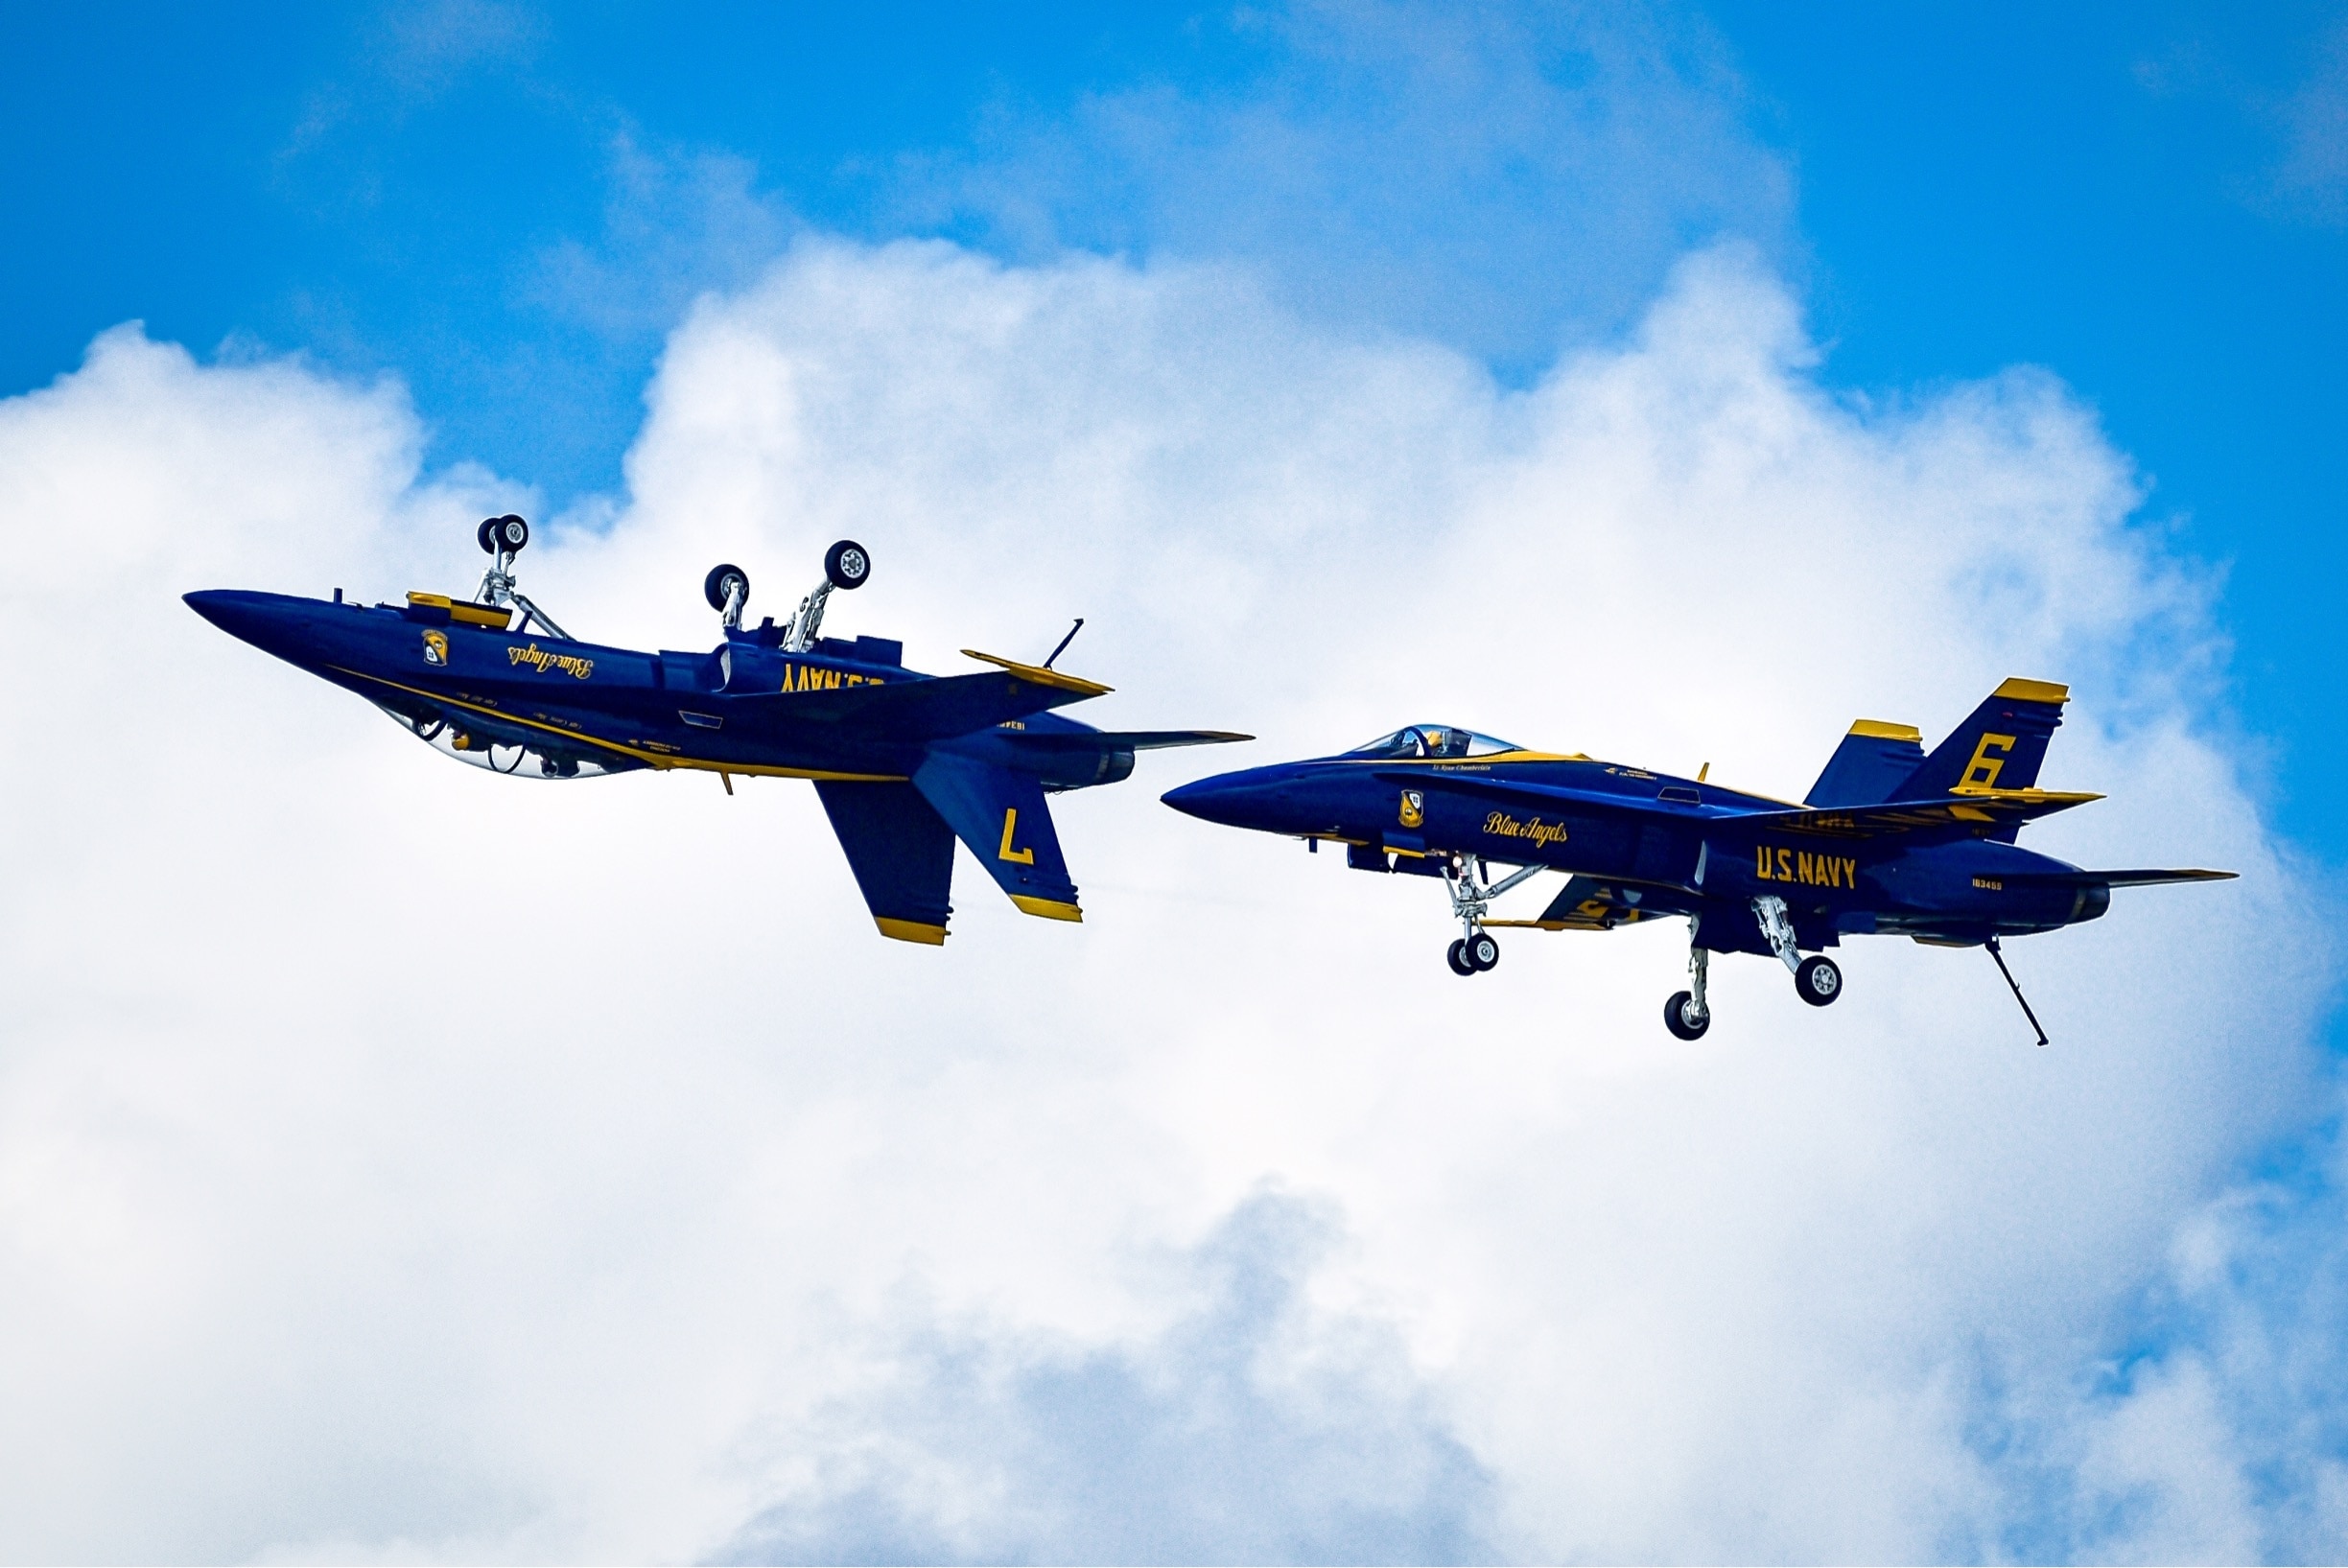 The Blue Angels performing some crazy low speed maneuvers. 